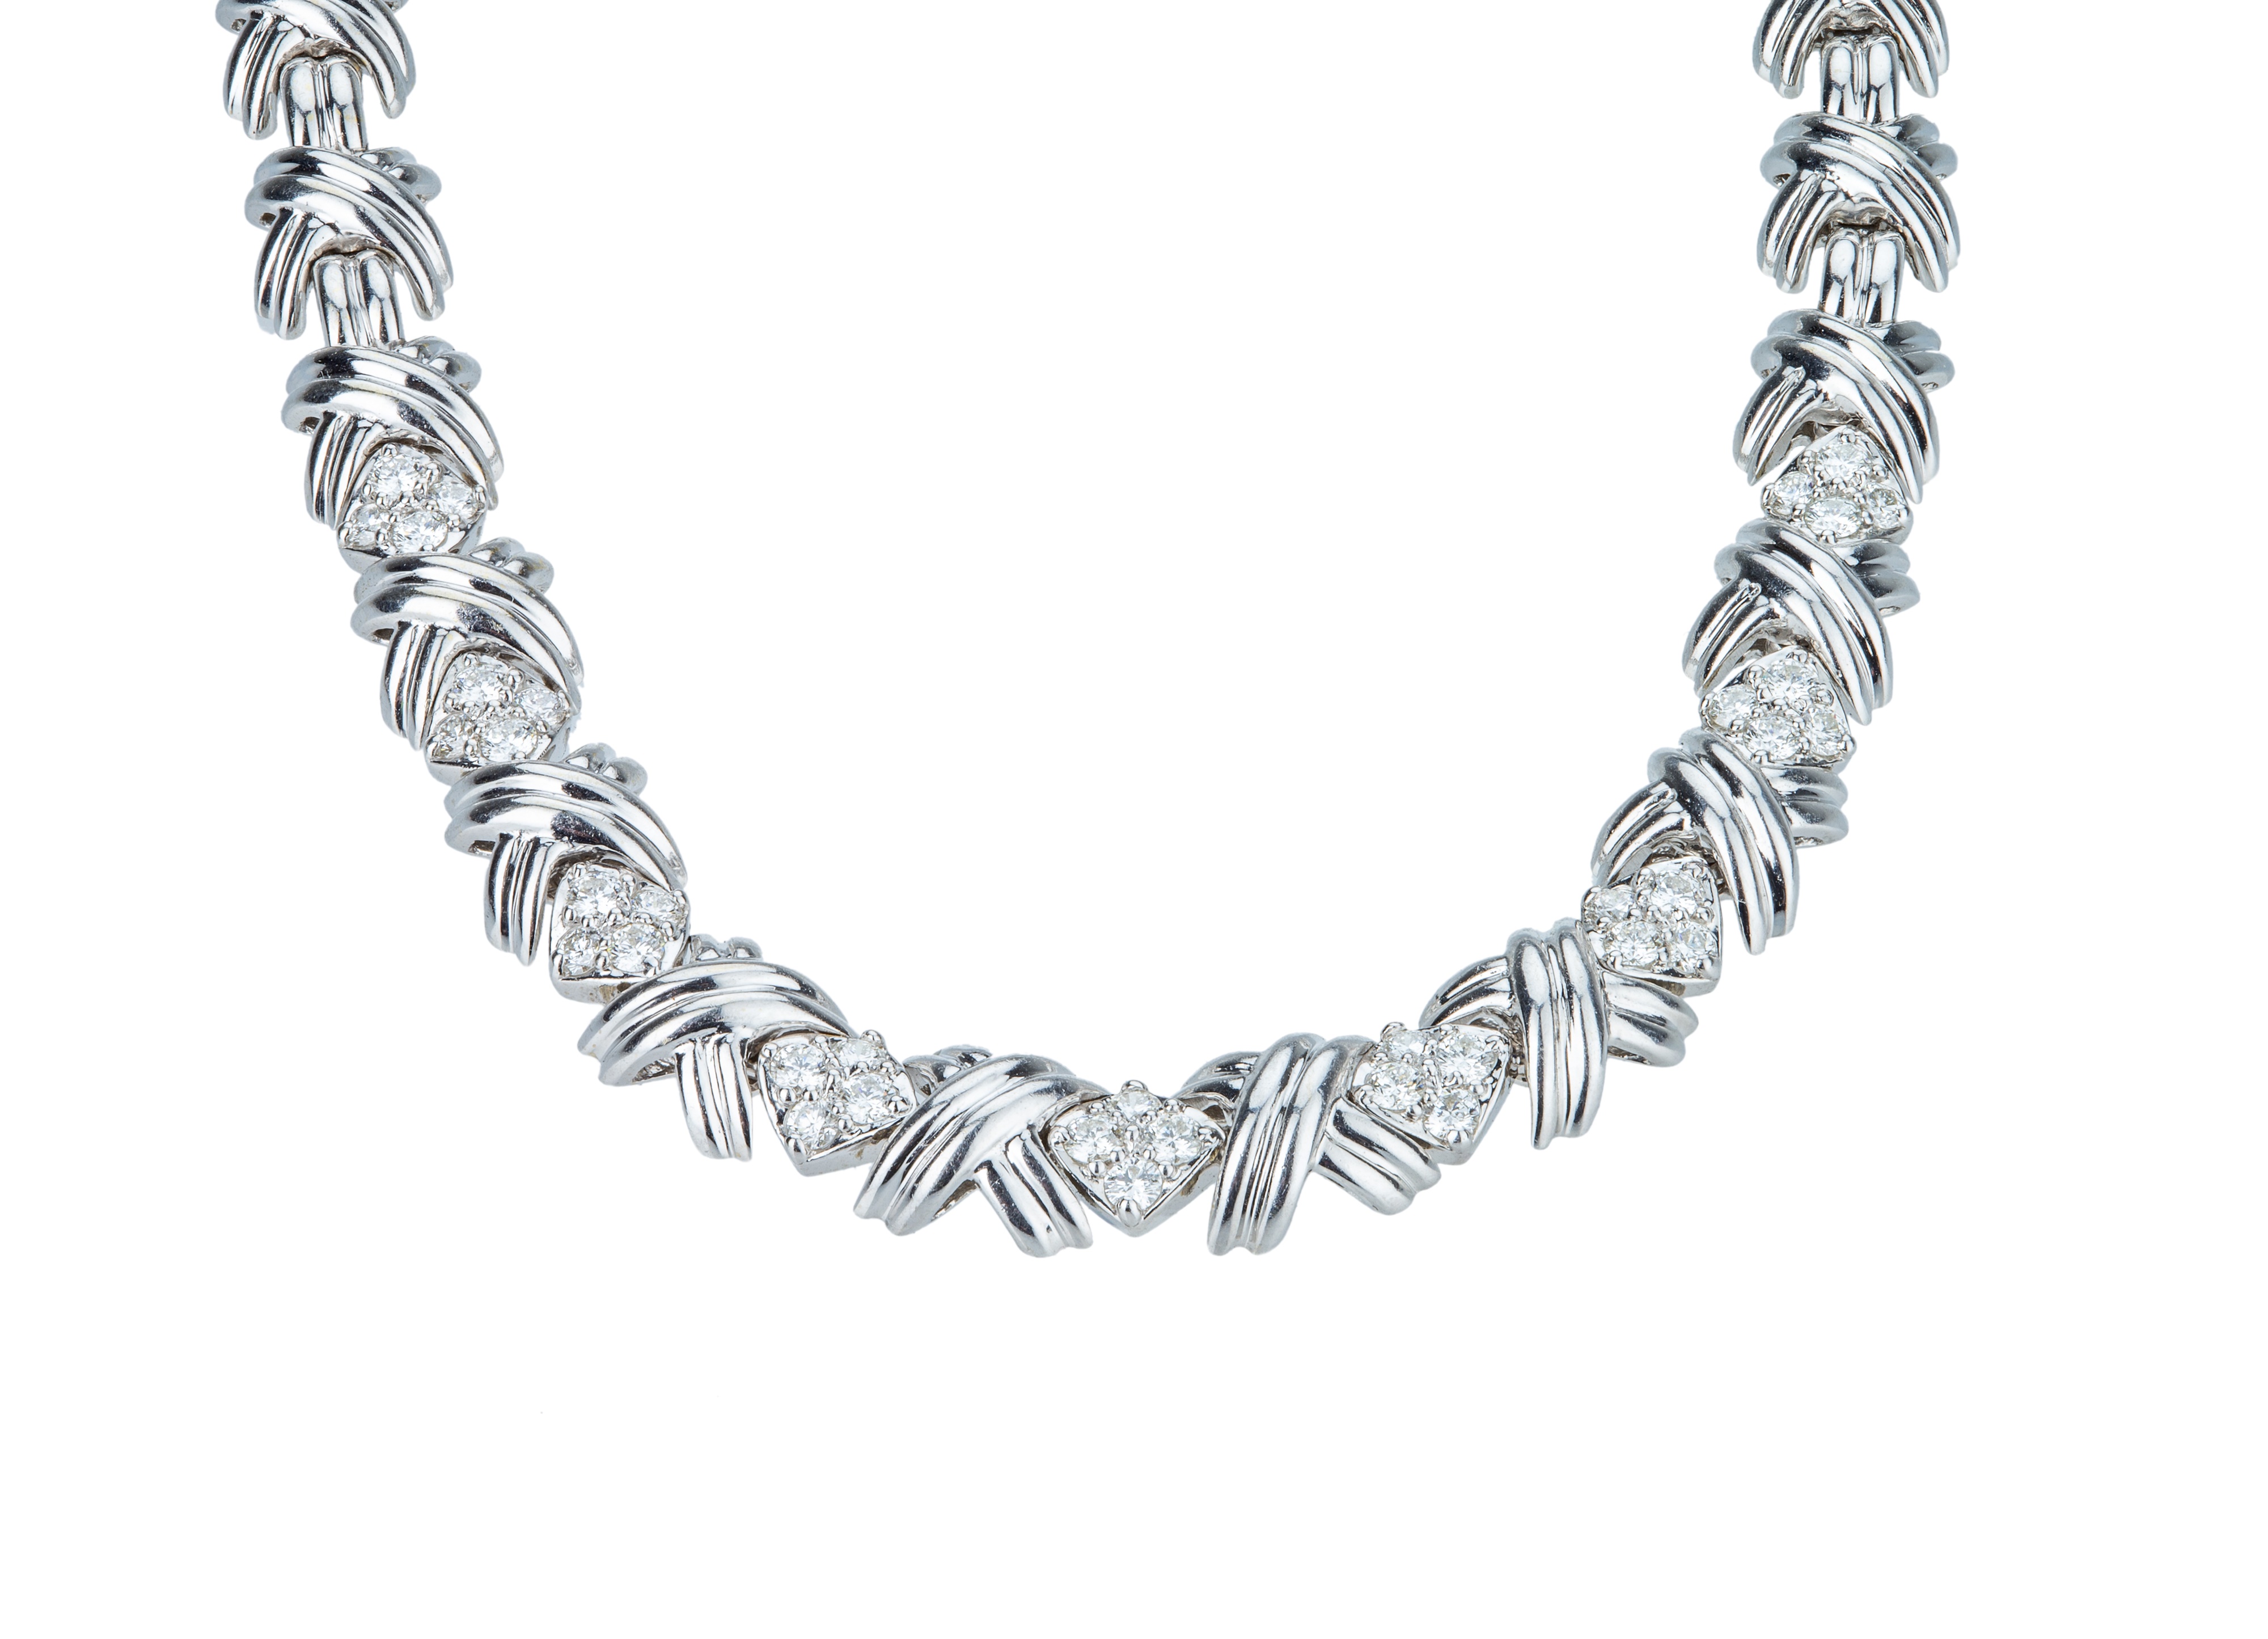 TIFFANY & Co. An 18 ct white gold and diamond necklace. - Image 2 of 5